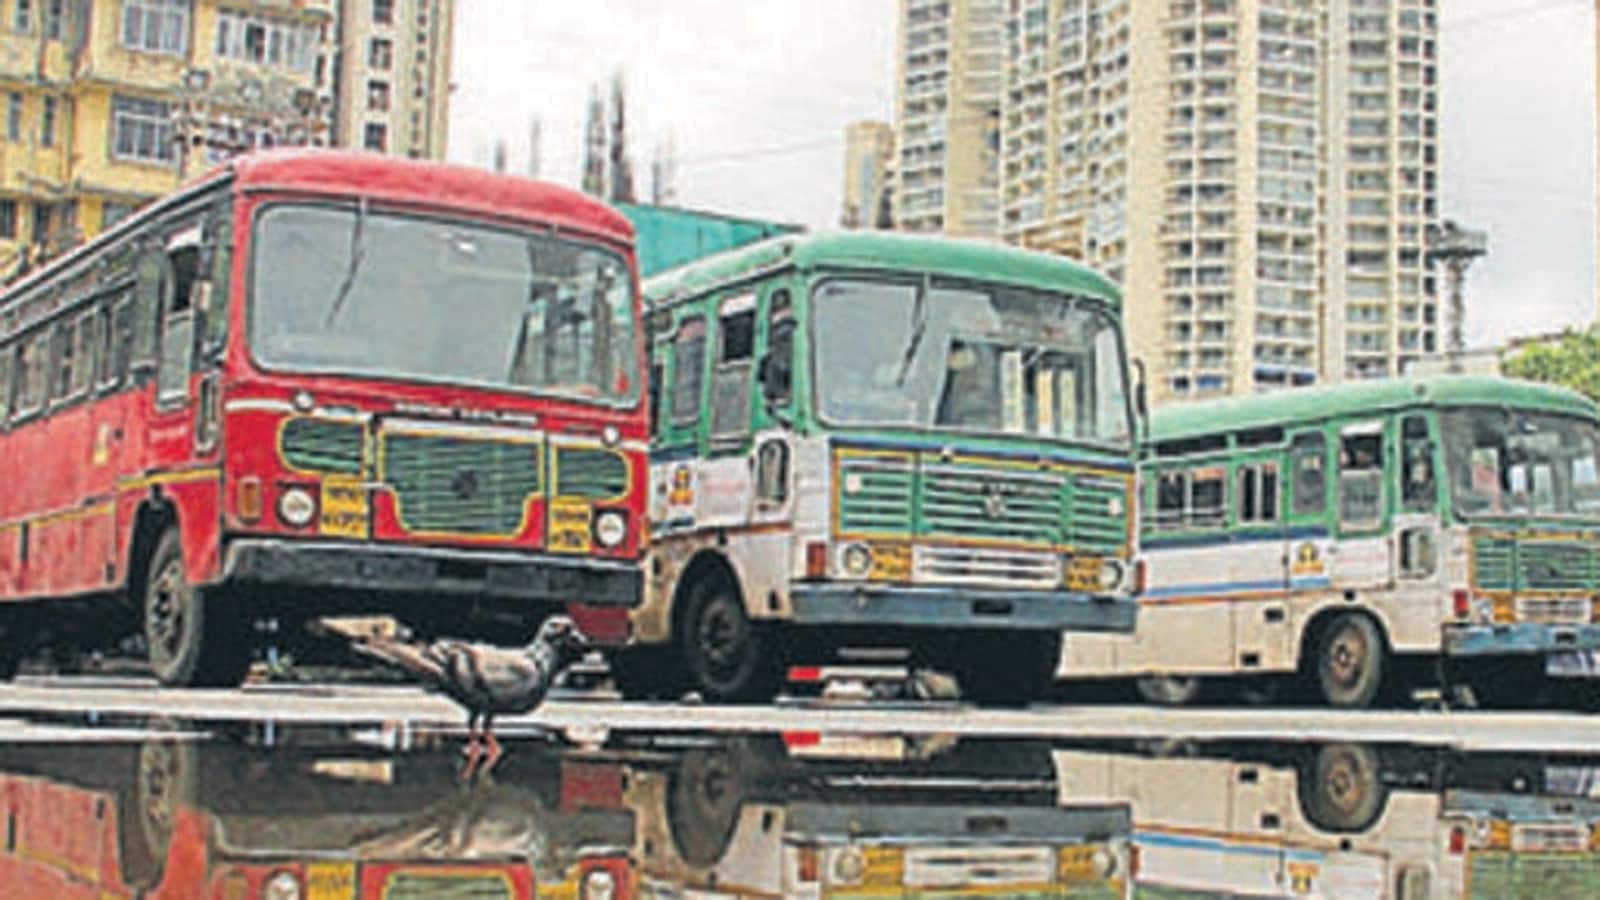 MSRTC faces shortage of 5,200 buses post Covid - Hindustan Times